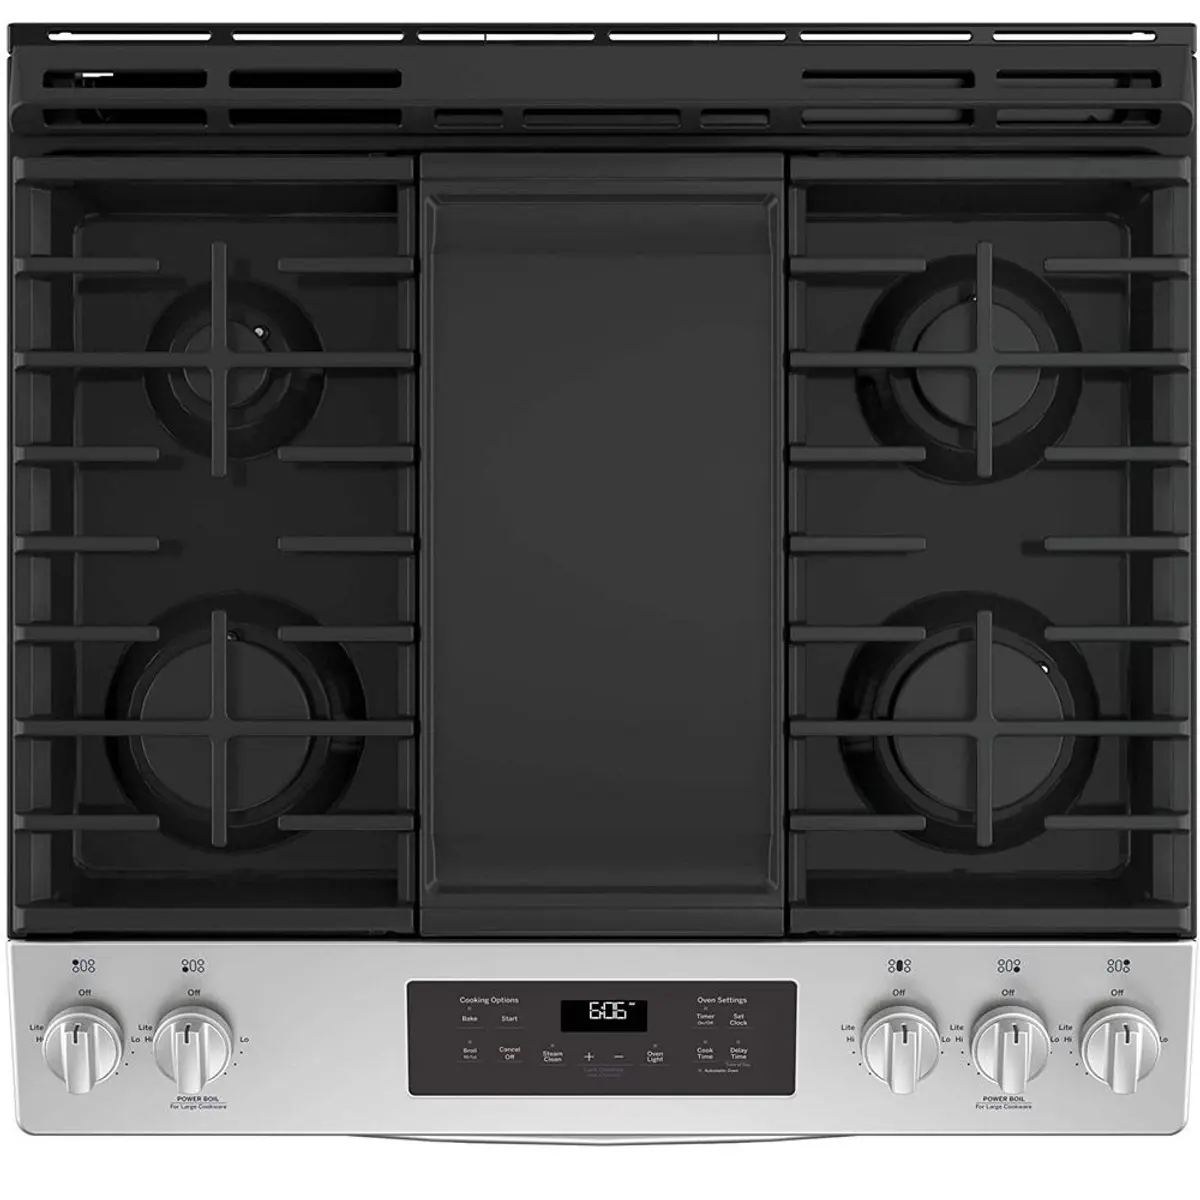 A Gas Cooktop: GE JGSS66SEL